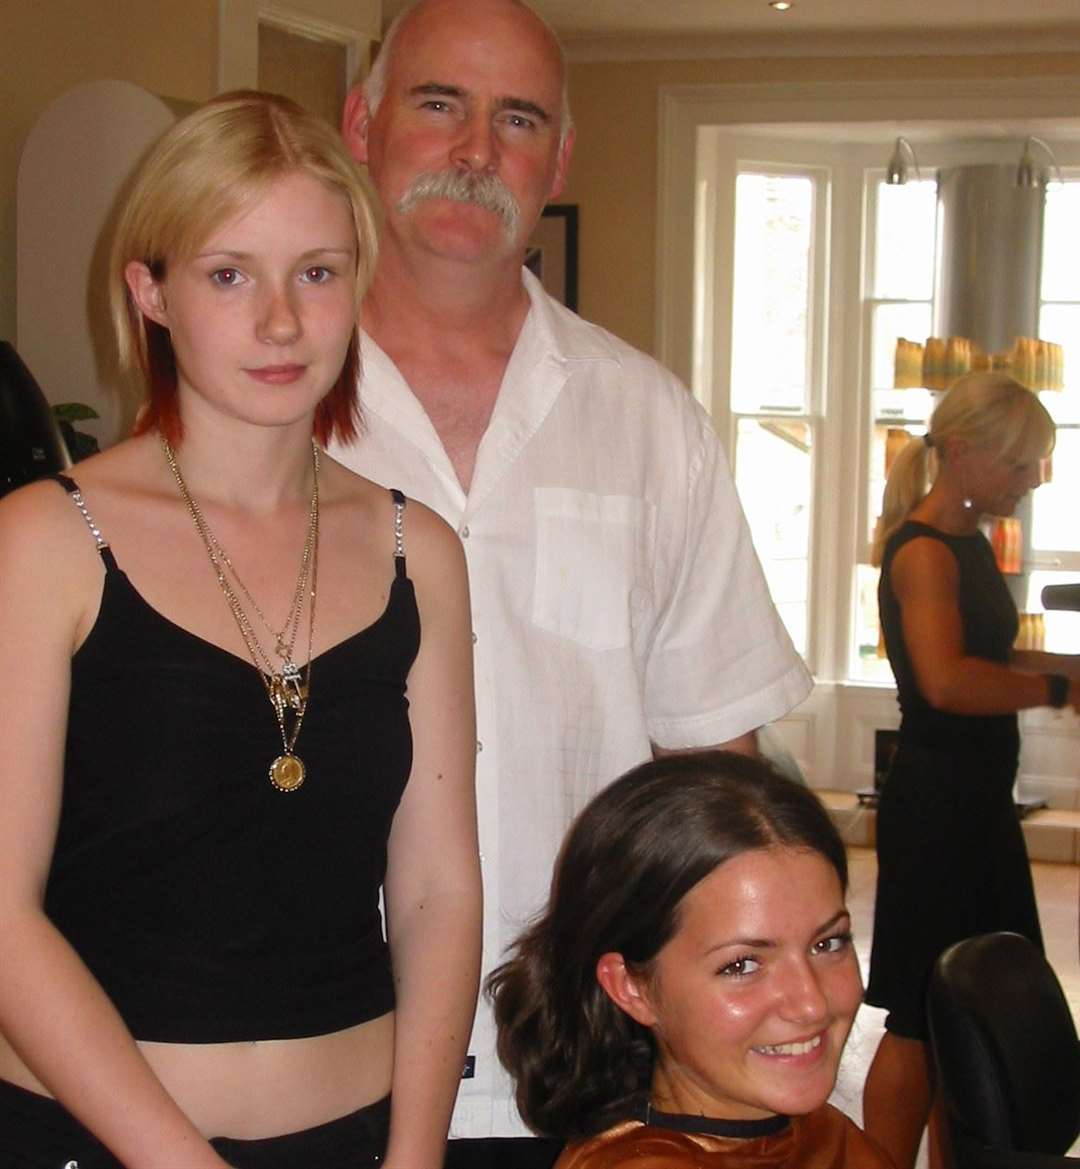 Robert Mitchell, pictured here in 2004 with Carrie Izzard and Sarah Bergin (seated), was the manager and co-owner of Antoniou before taking it over alone in 2008. He later returned to the Antoniou fold.